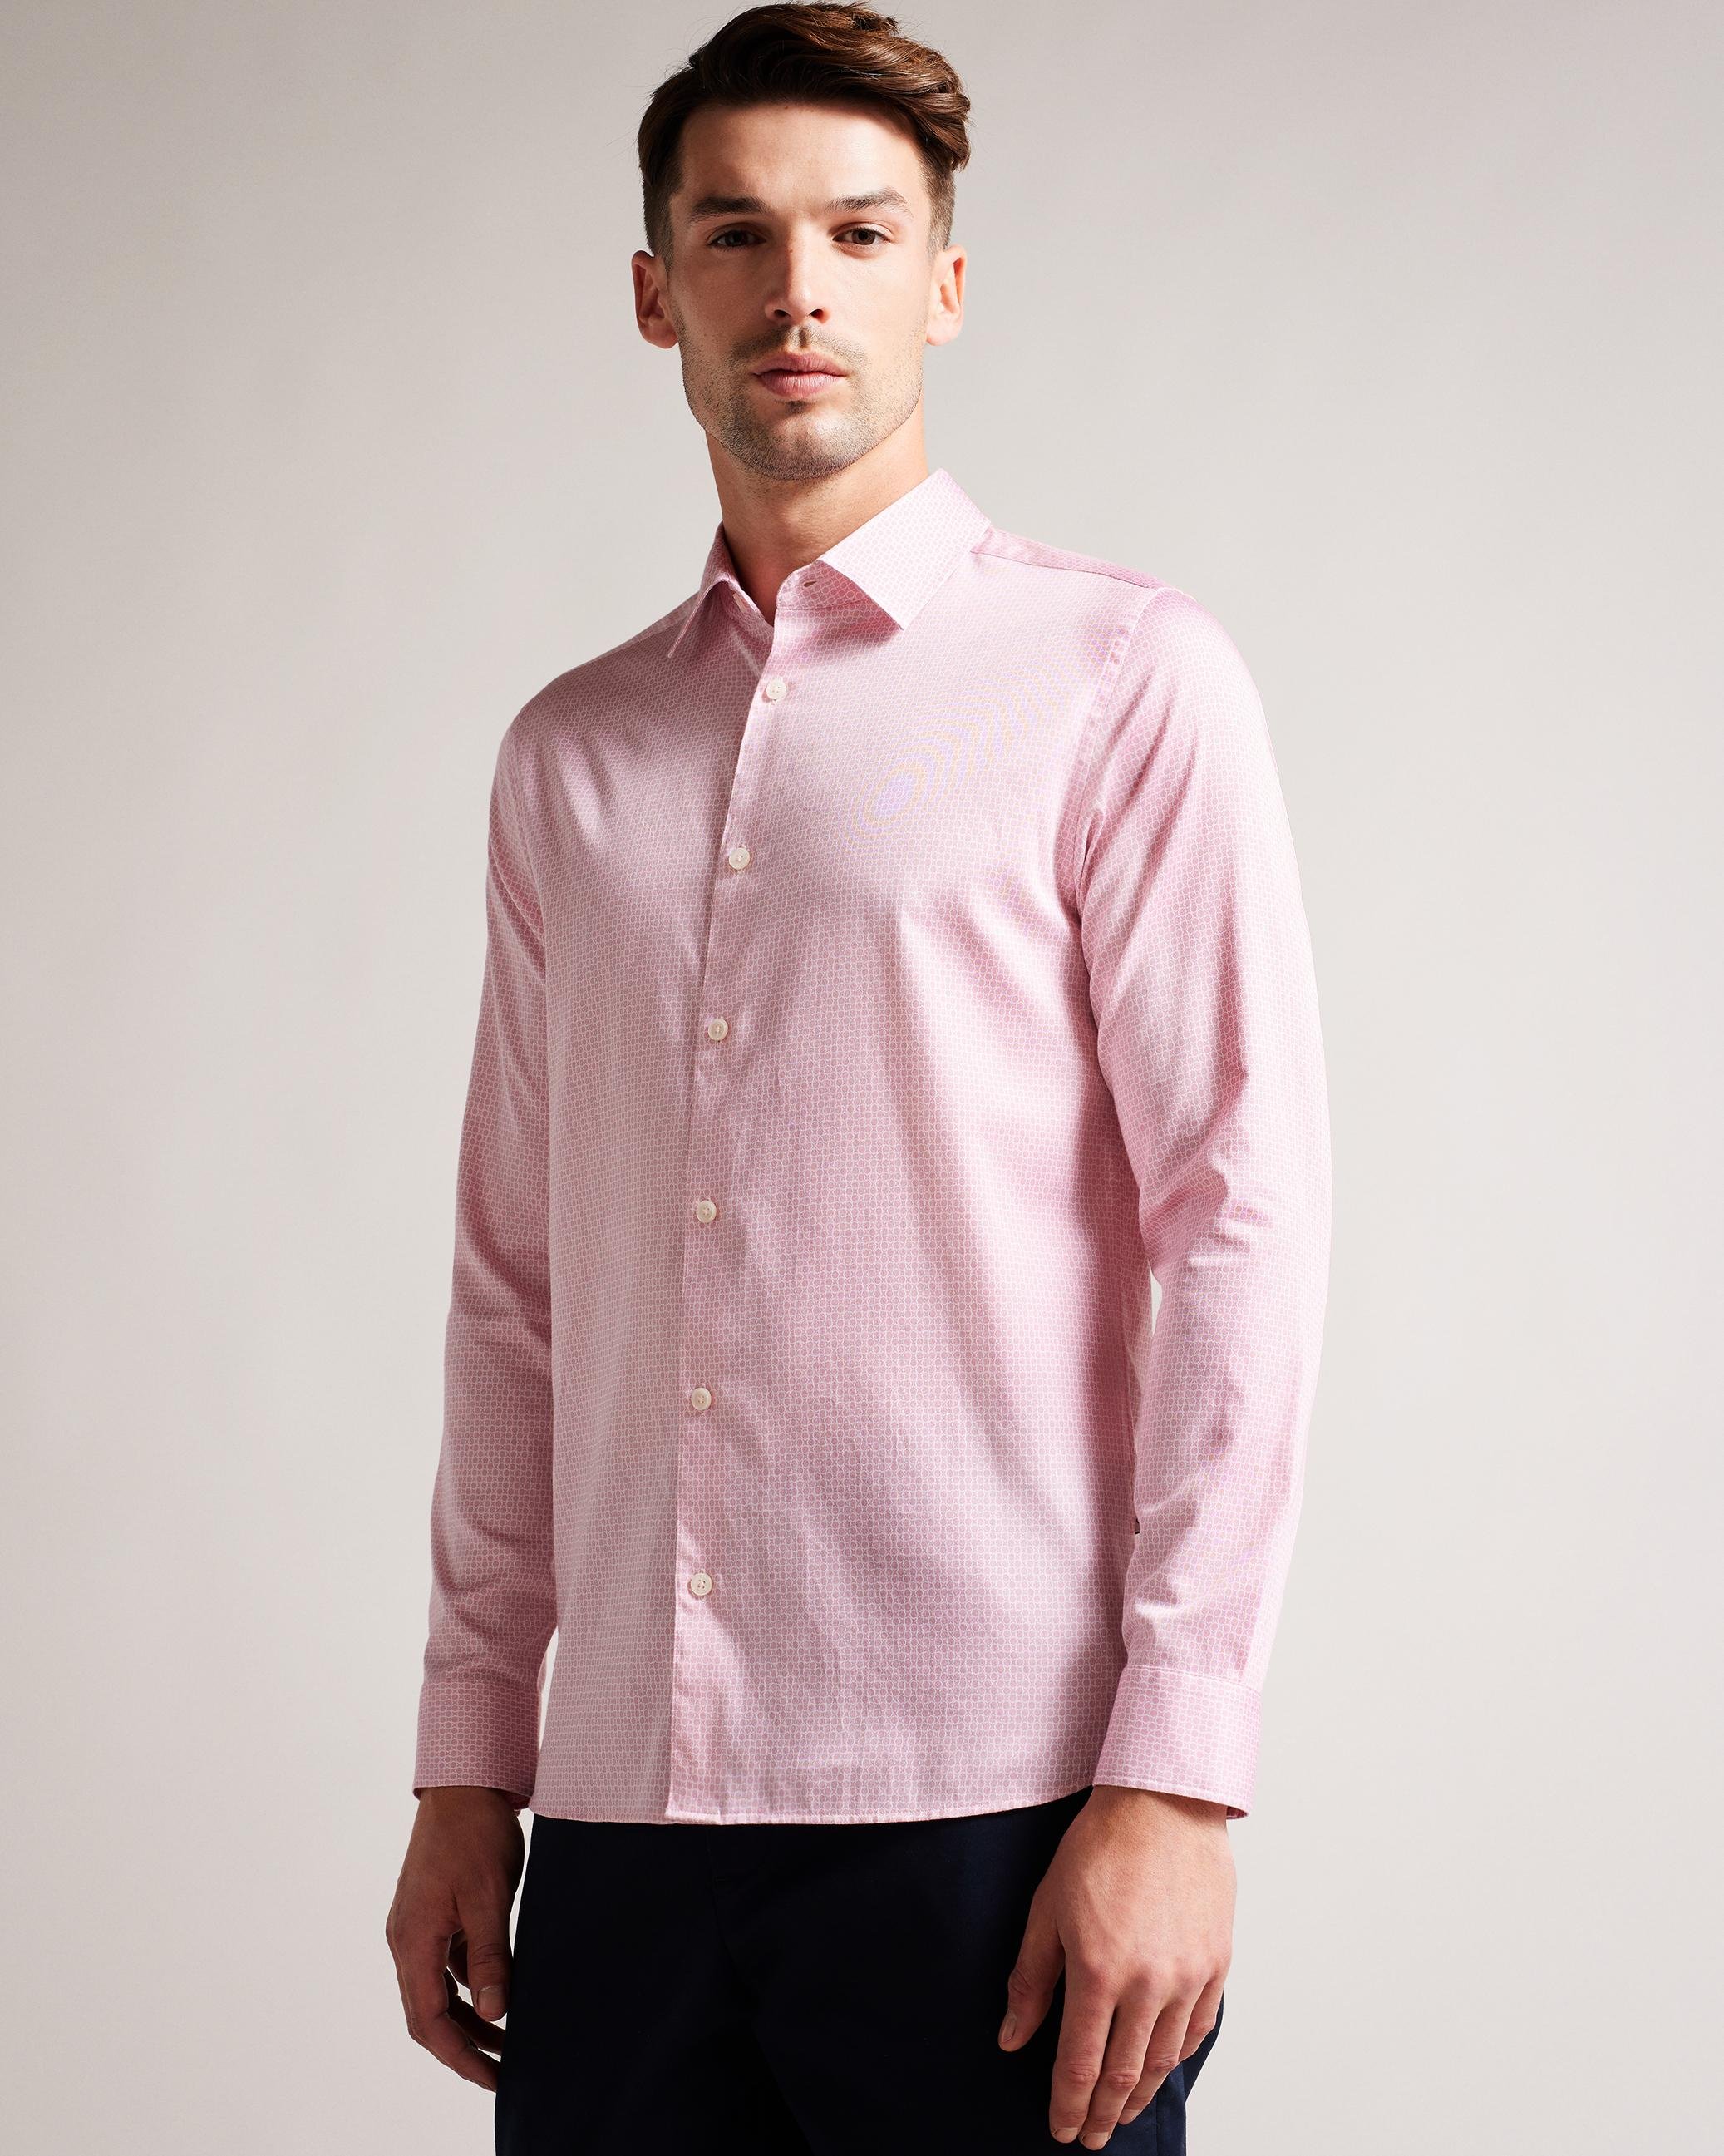 Long Sleeve Geometric Print Shirt - WILLET - Pale Pink by TED BAKER